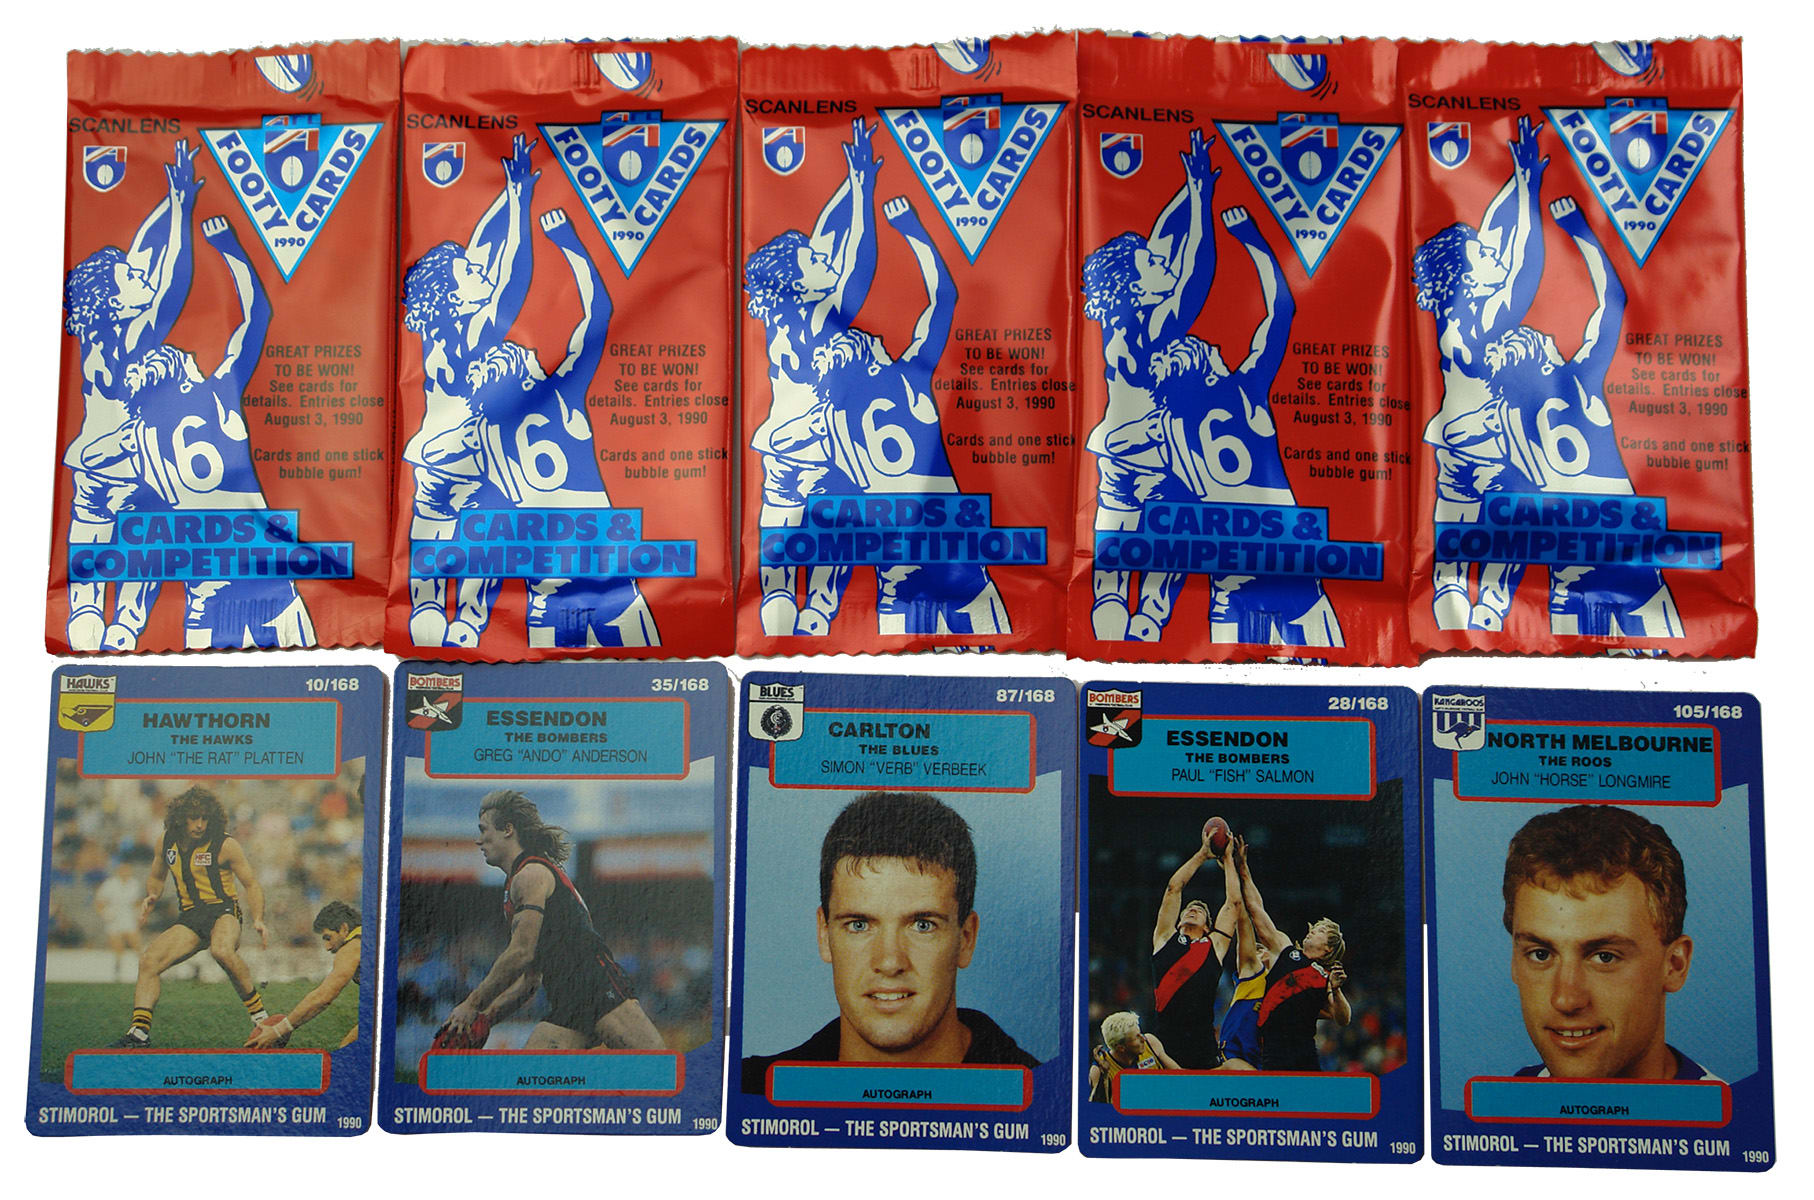 Scanlens Footy Cards 1990 Unopened Packets